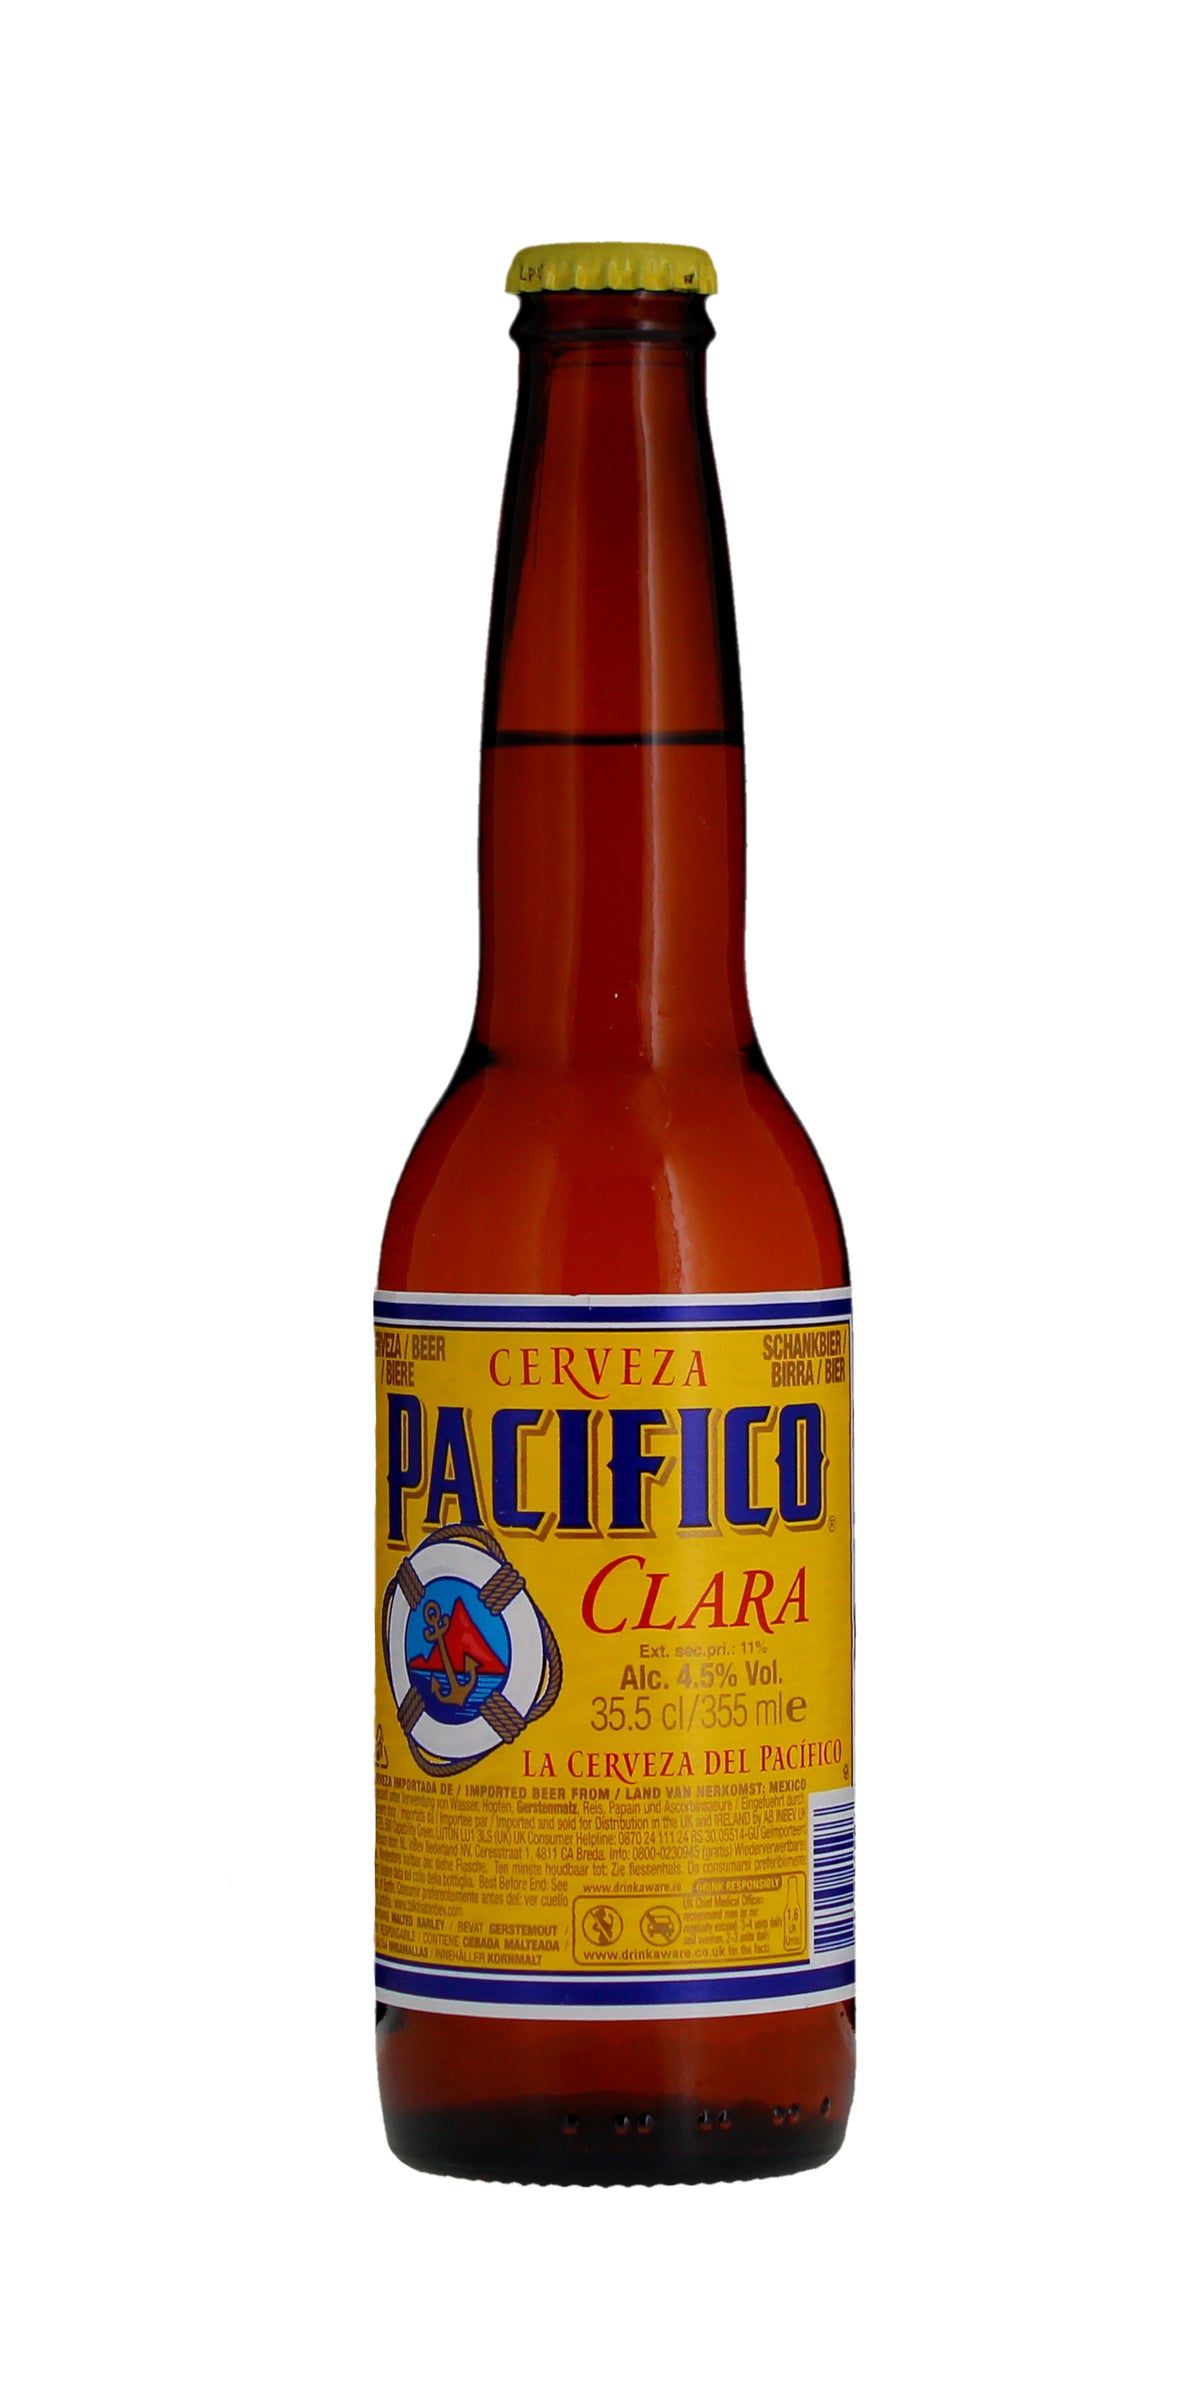 Pacifico Clara, Mexican Lager 4.5% 330ml Bottle